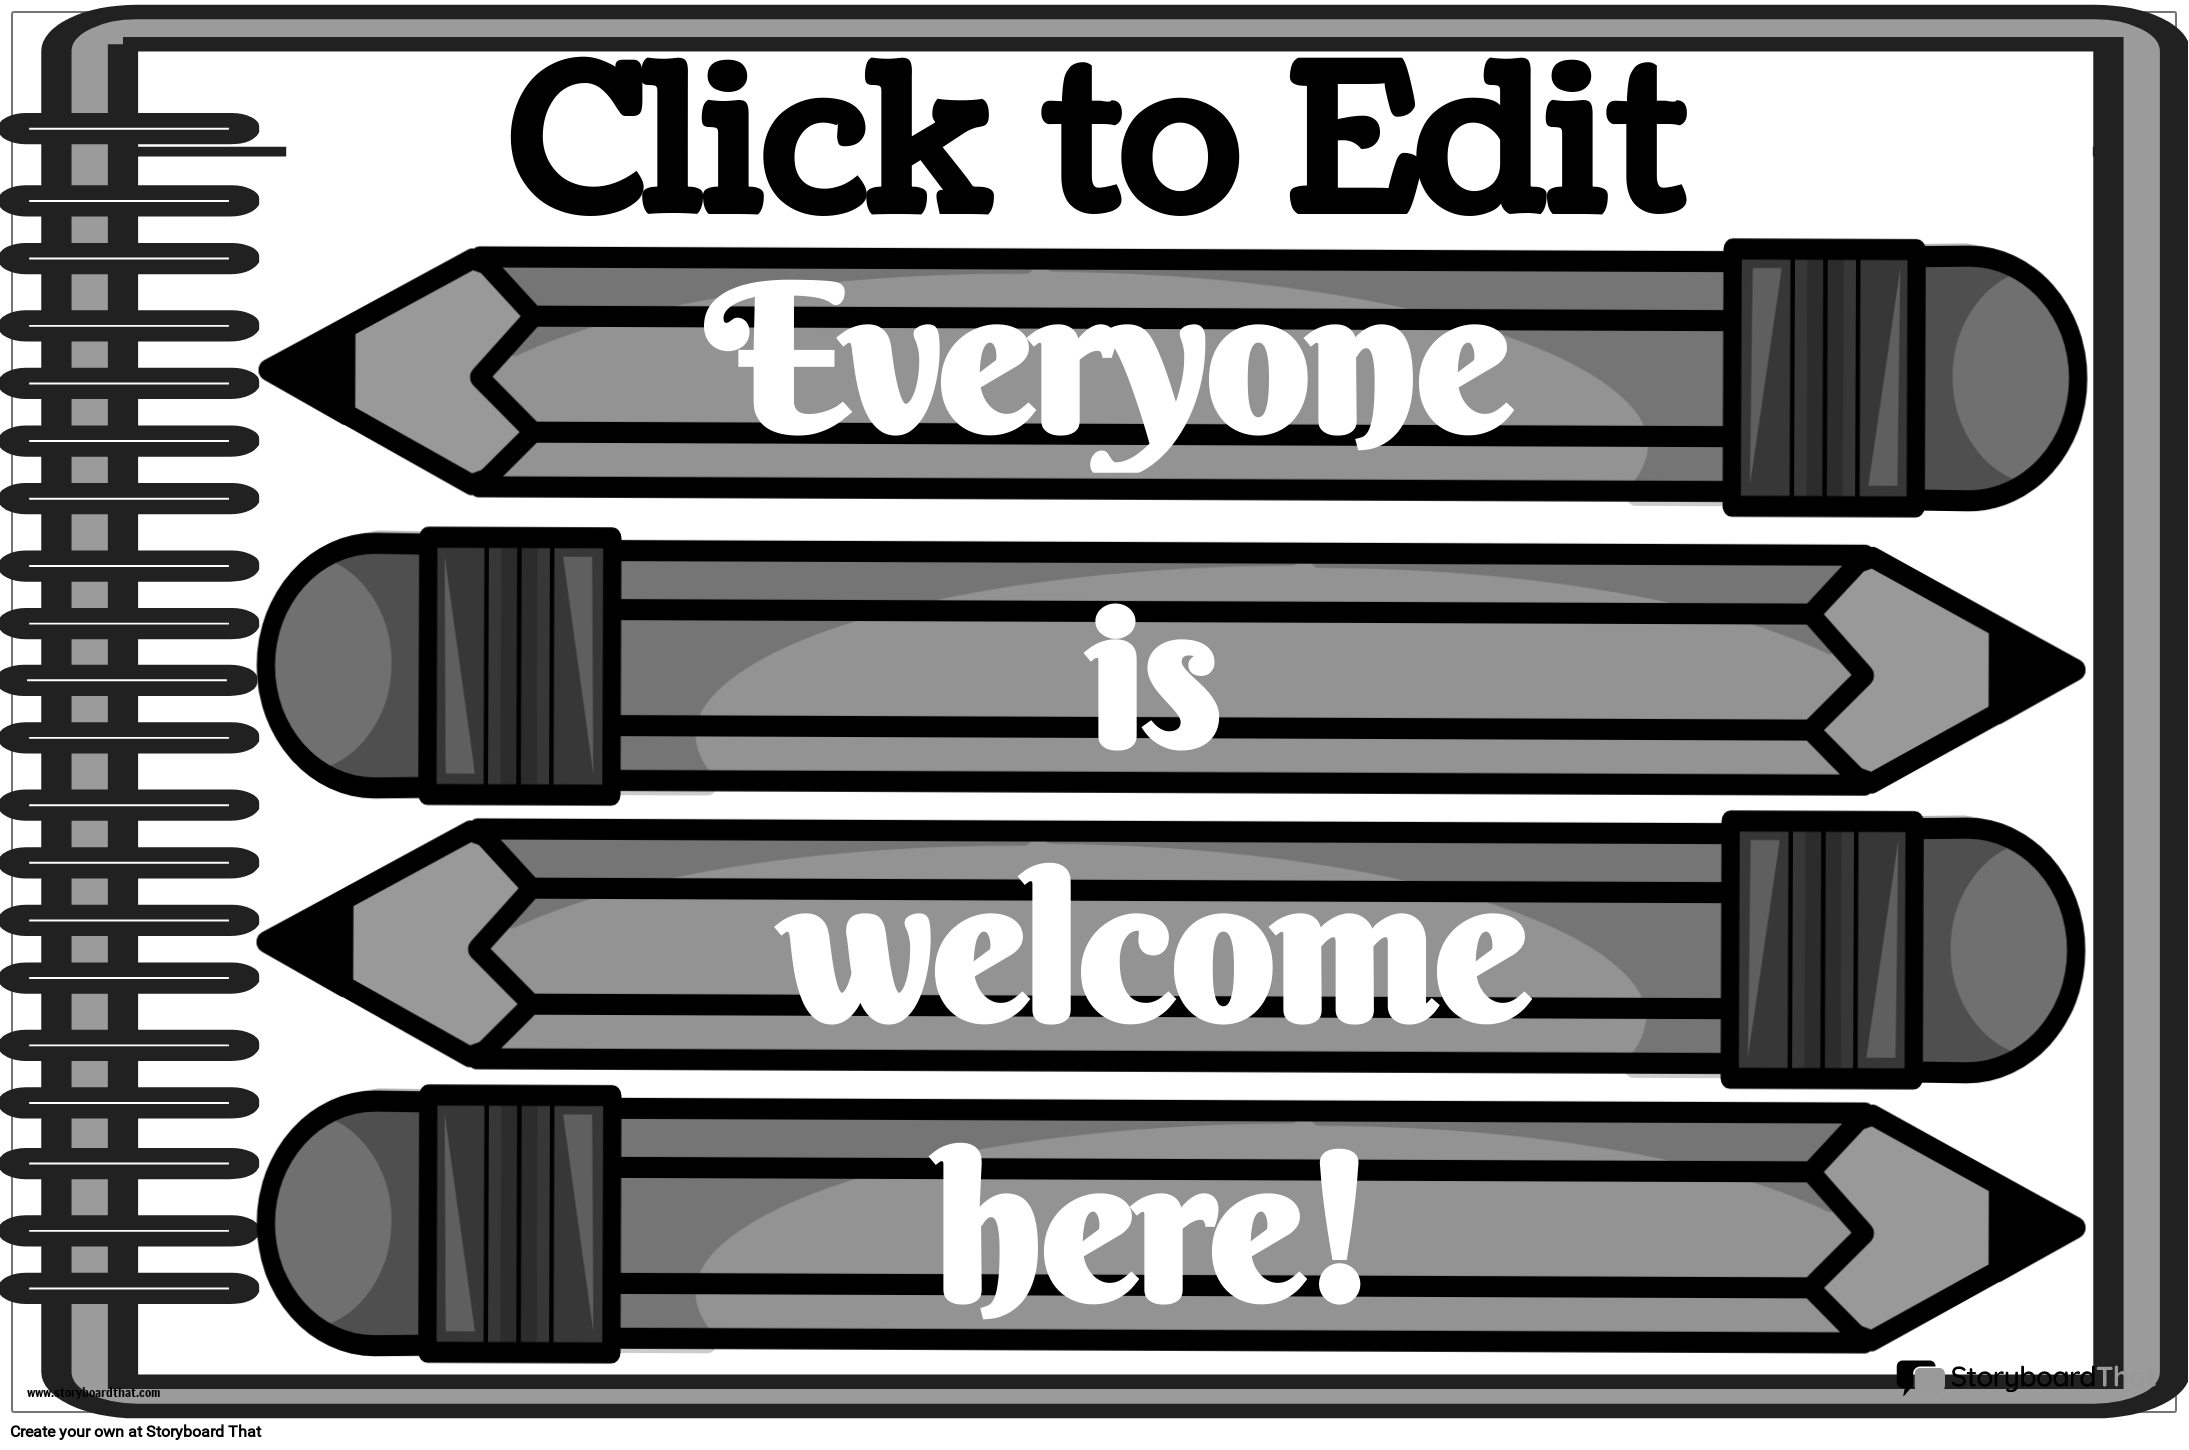 Welcome Poster featuring pencils B&W